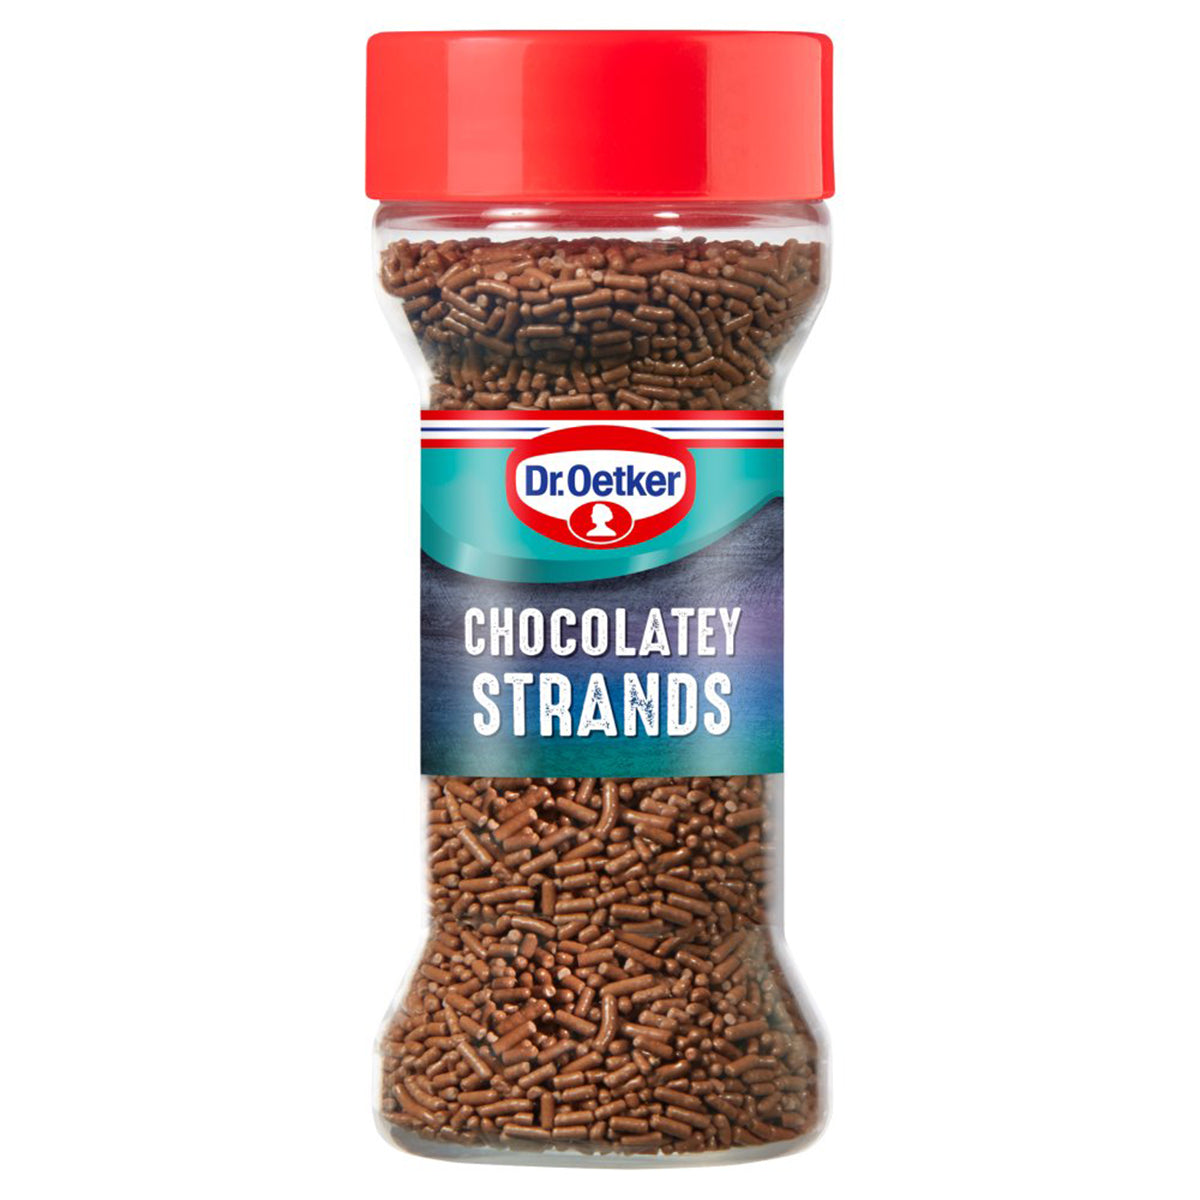 Dr. Oetker - Chocolatey Strands - 55g - Continental Food Store